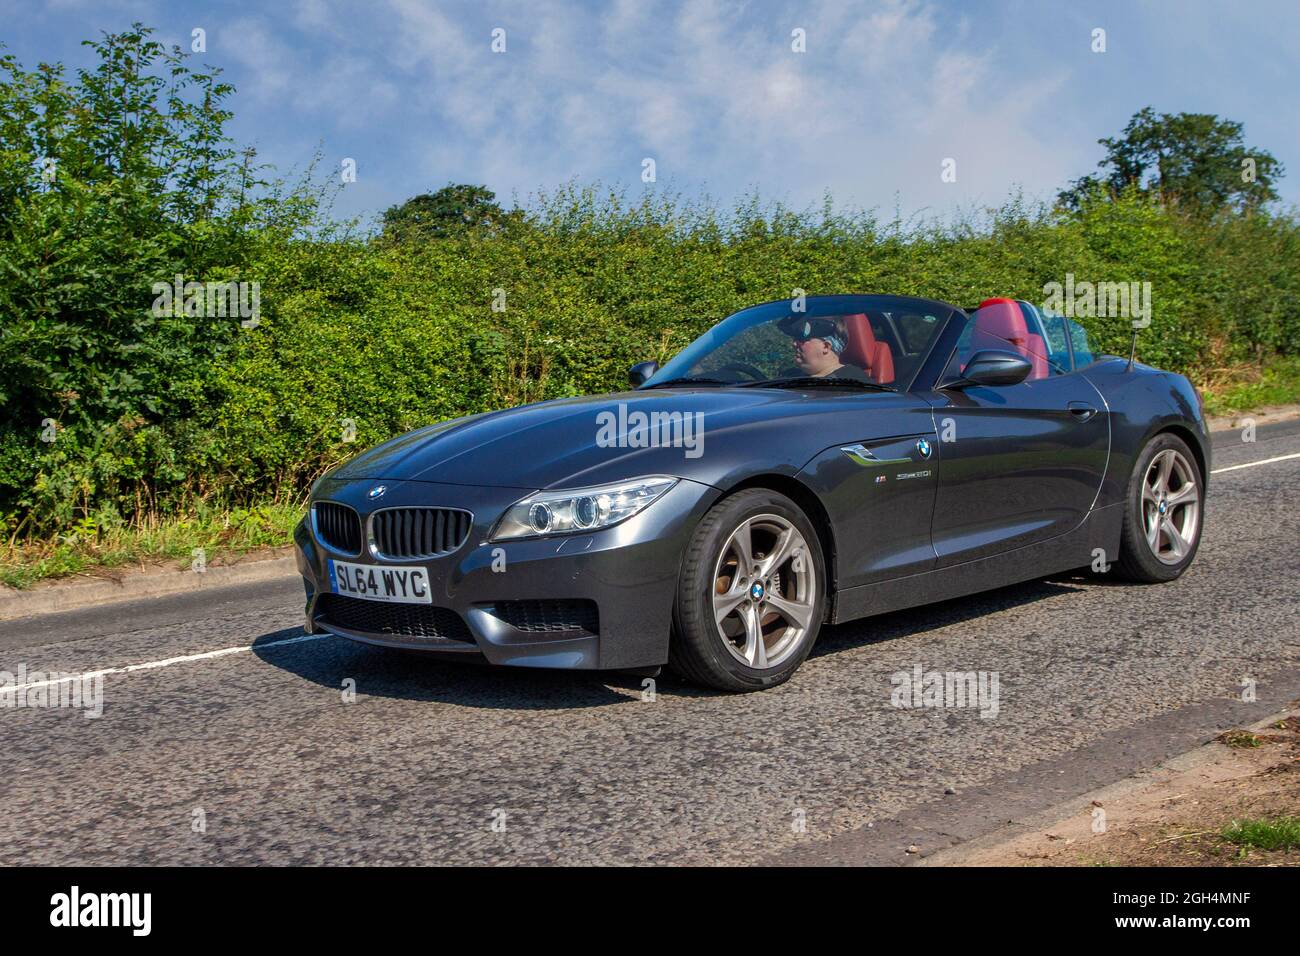 2014 Z4 SDrive201 M Sport 1997cc petrol Roadster, en-route to Capesthorne Hall classic July car show, Cheshire, UK Stock Photo